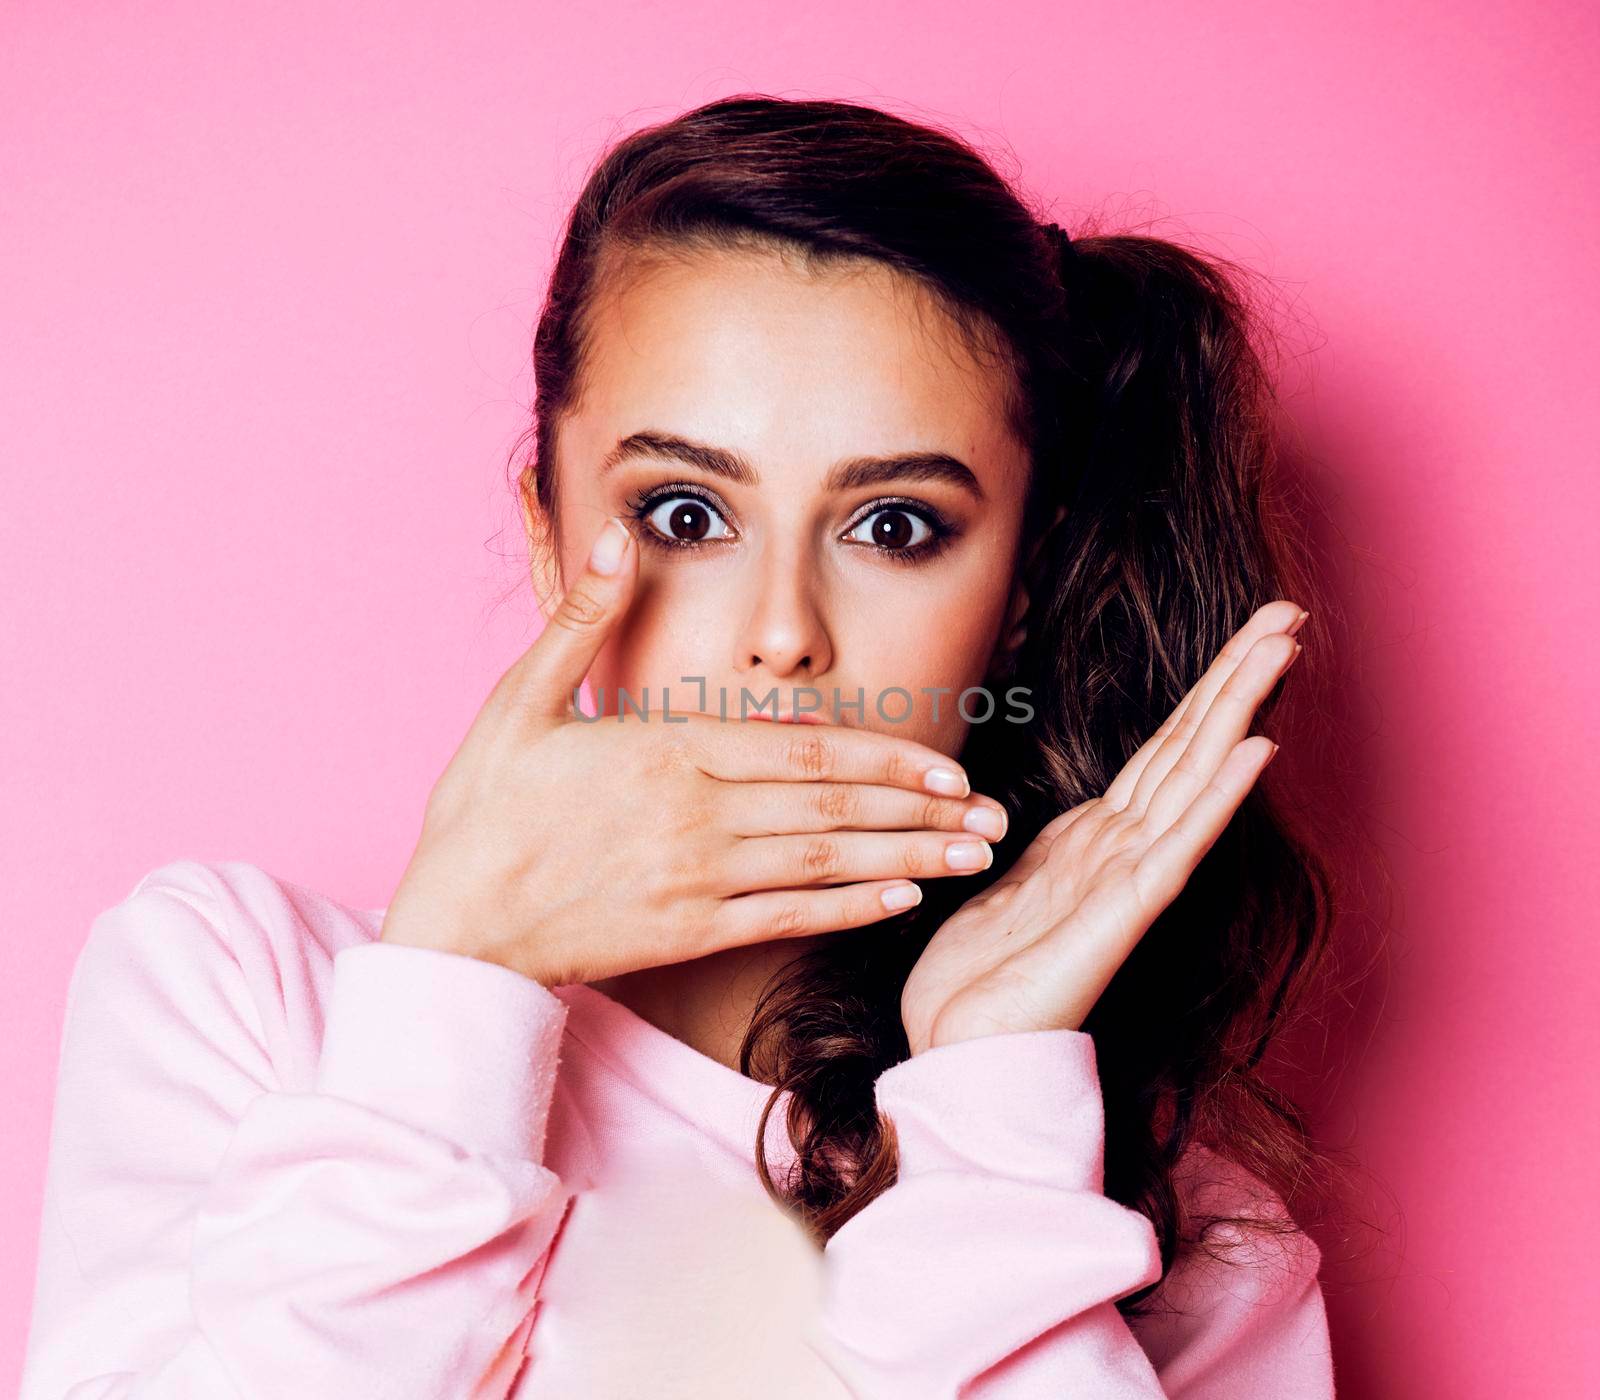 young pretty teenage girl emotional posing on pink background, fashion lifestyle people concept closeup copyspace